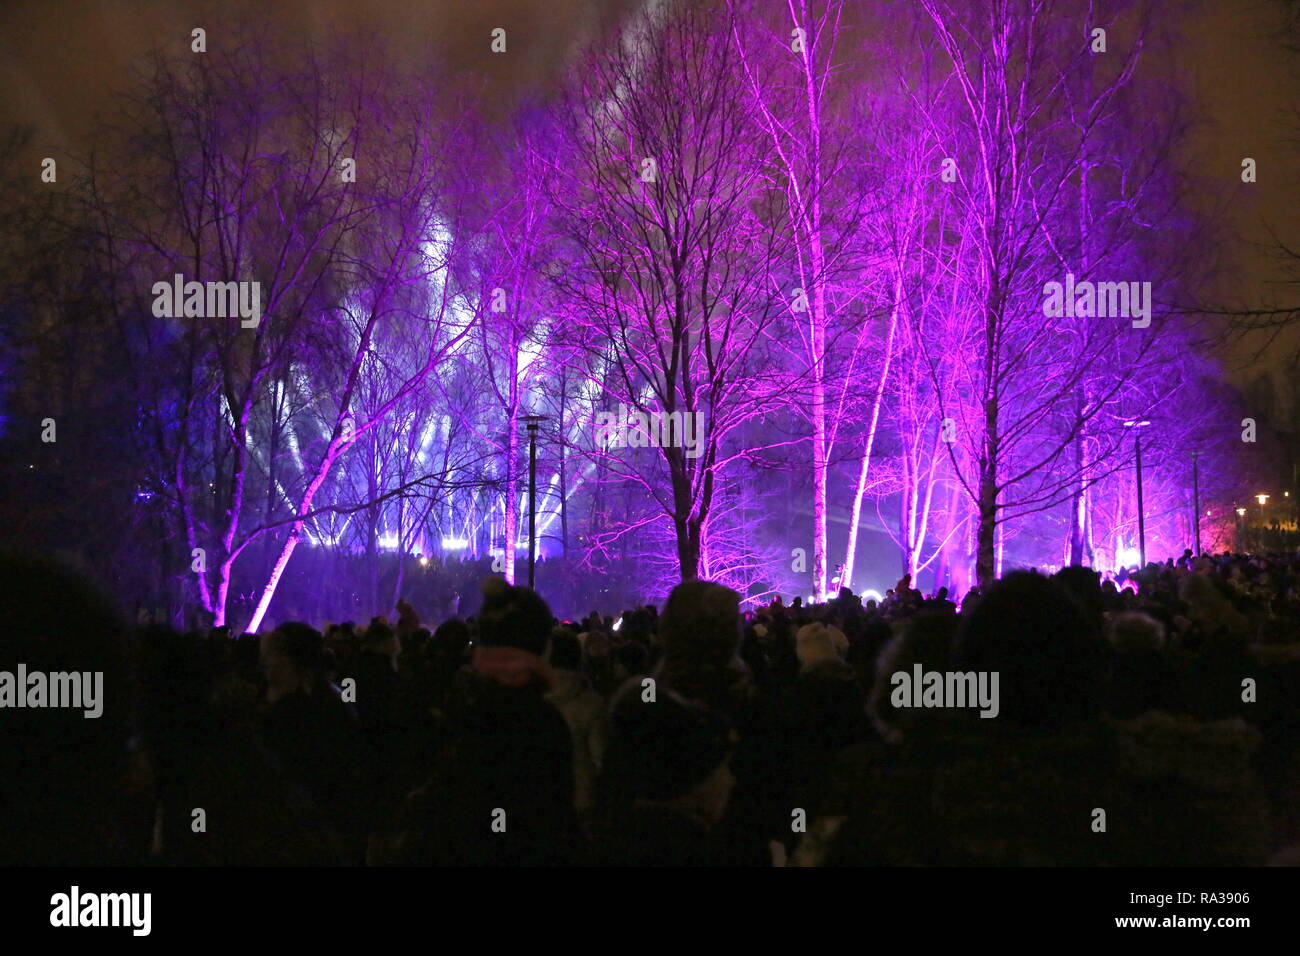 (190101) --ESPOO, Jan. 1, 2019 (Xinhua) -- A massive laser show is held to celebrate the New Year in the city of Espoo, Finland, on Dec. 31, 2018. Espoo becomes the first city in Finland to replace fireworks with laser show when celebrating the New Year. The public demand for banning the use of fireworks is constantly rising in recent years in Finland, aiming to reduce the cases of injuries, air pollution and stress and anxiety in animals caused by fireworks. (Xinhua/Li Jizhi) Stock Photo